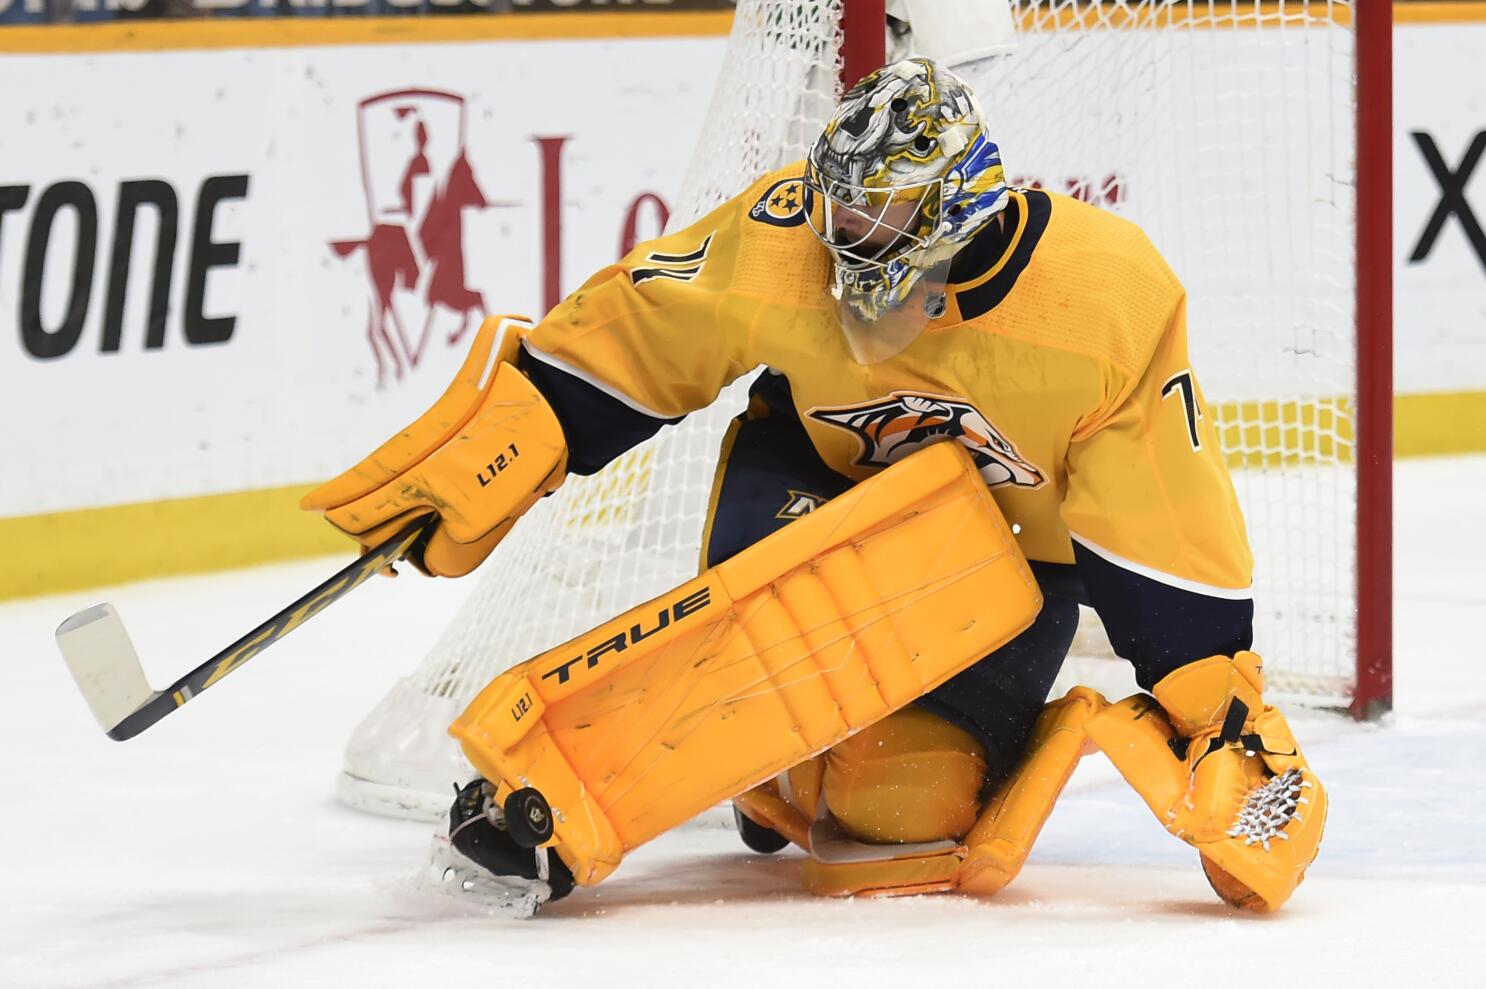 Shayna on X: How important has Saros been for the Predators this